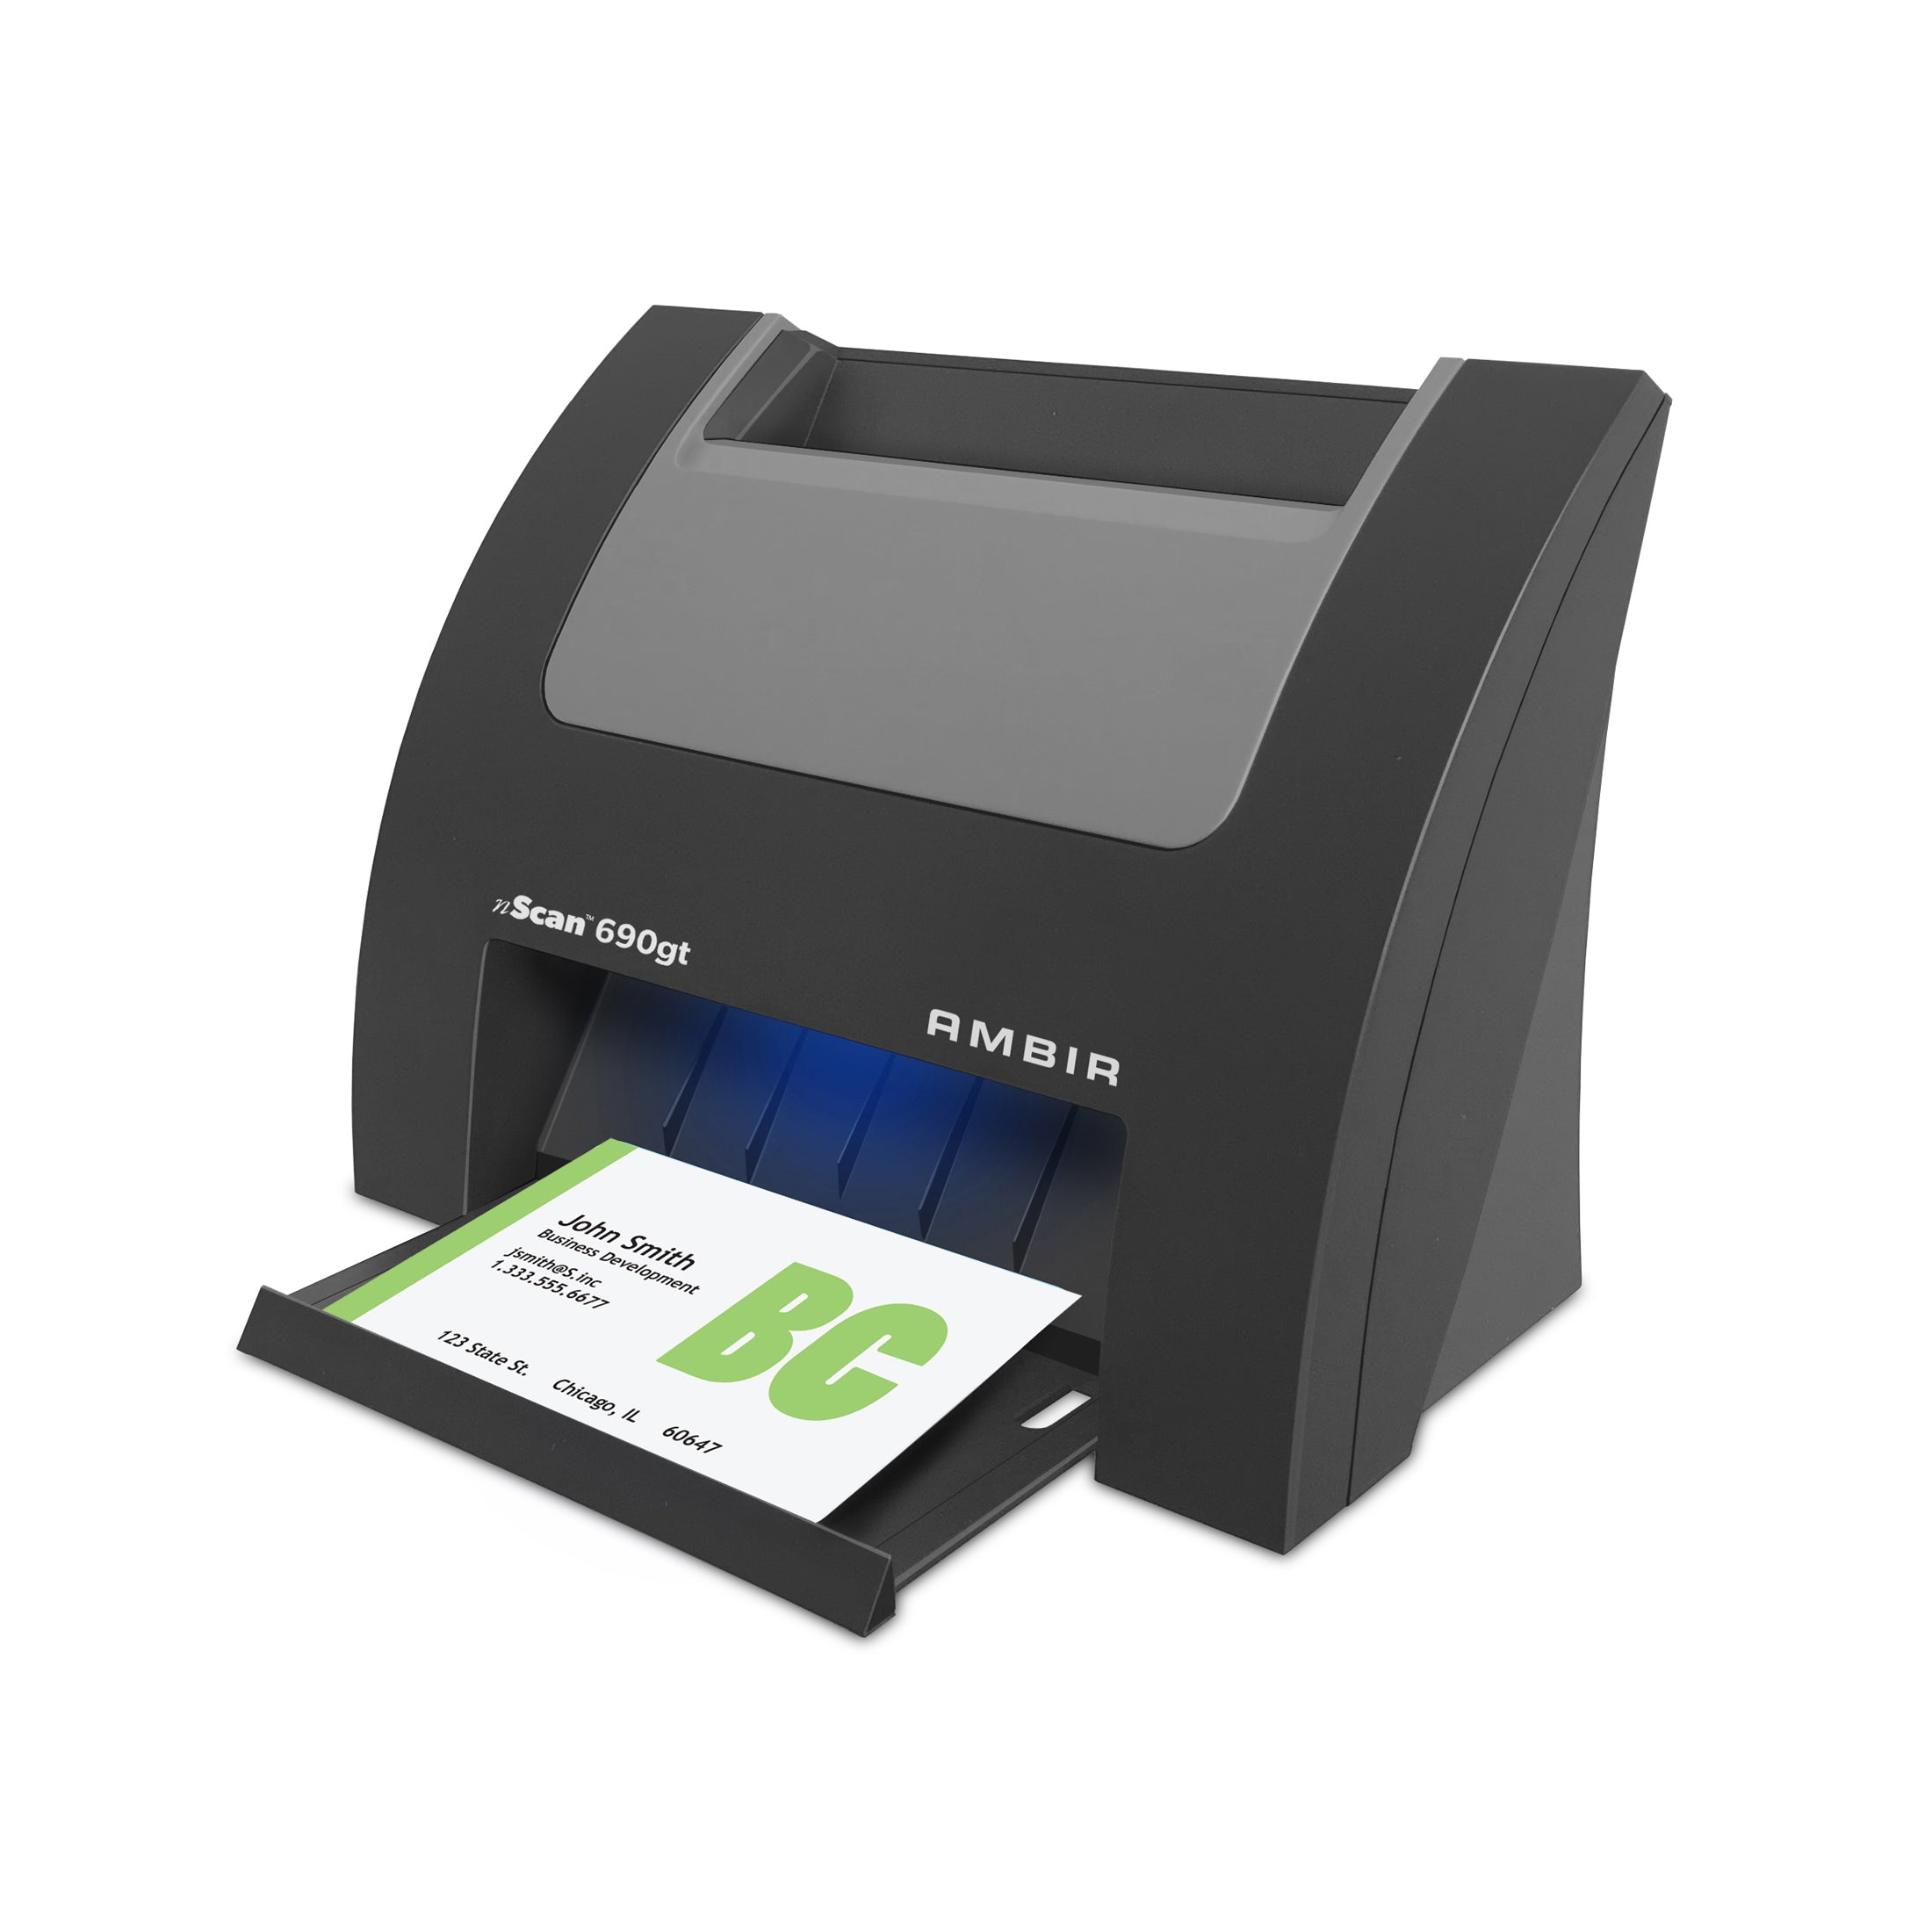 nScan 690gt Duplex ID Card Scanner AmbirScan for athena (DS690GT-A3P)